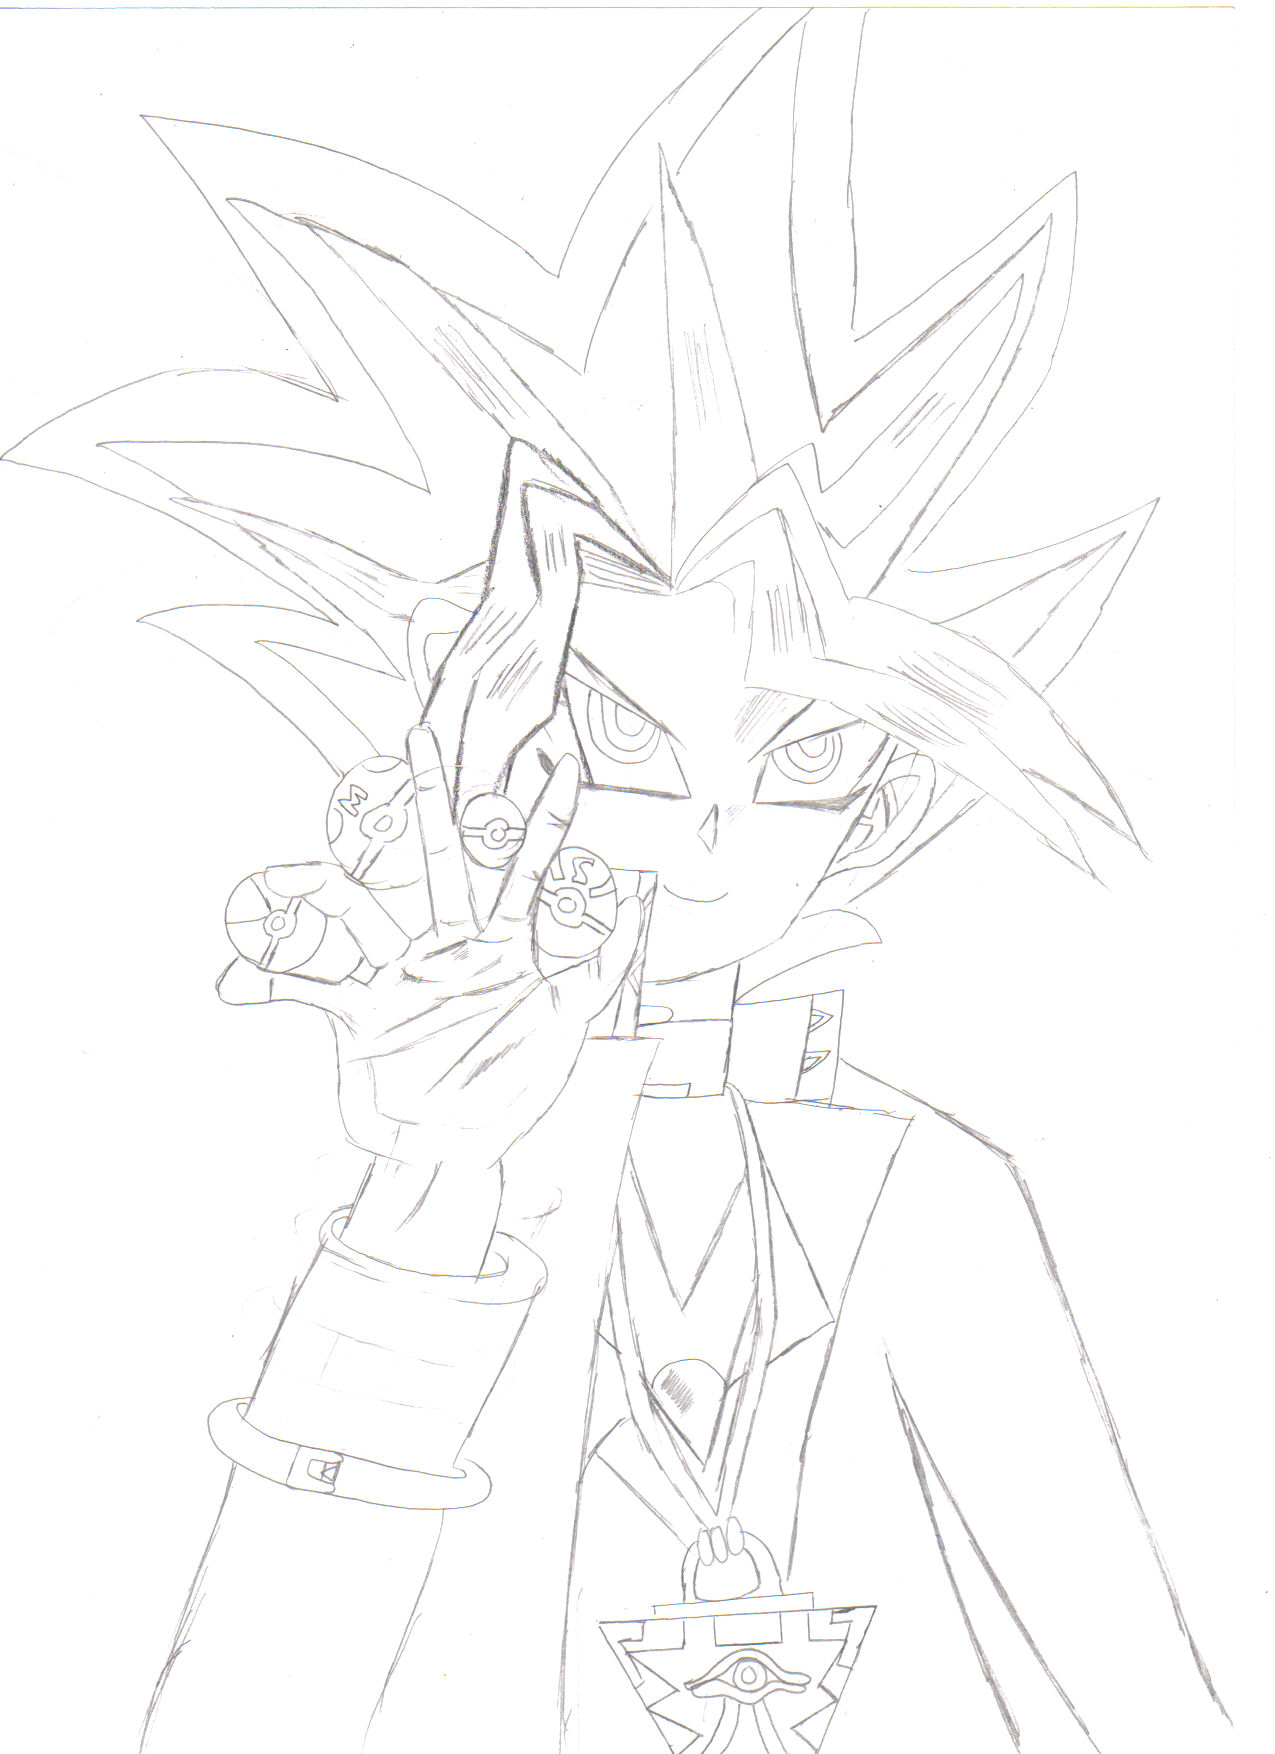 Yami Yugi Holding Pokeballs In A Cool Style by Just_A_Artist